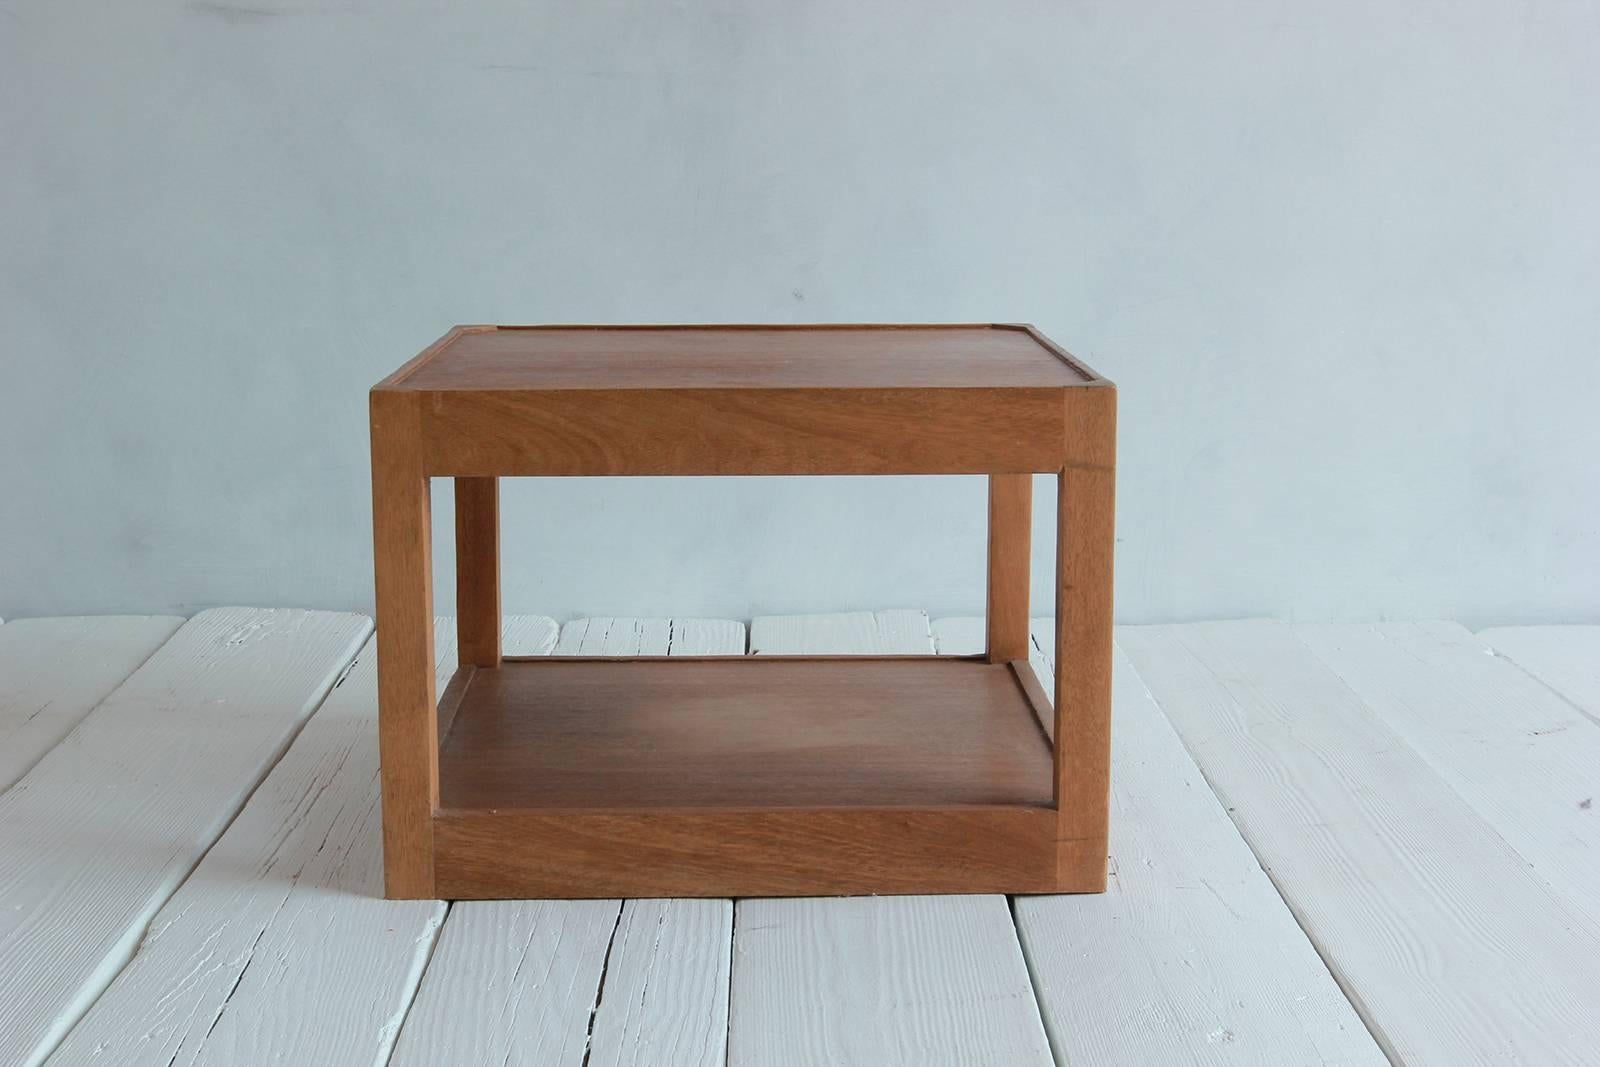 Late 20th Century Walnut Side Table with Bottom Shelf and Parson Style Legs with Single Drawer